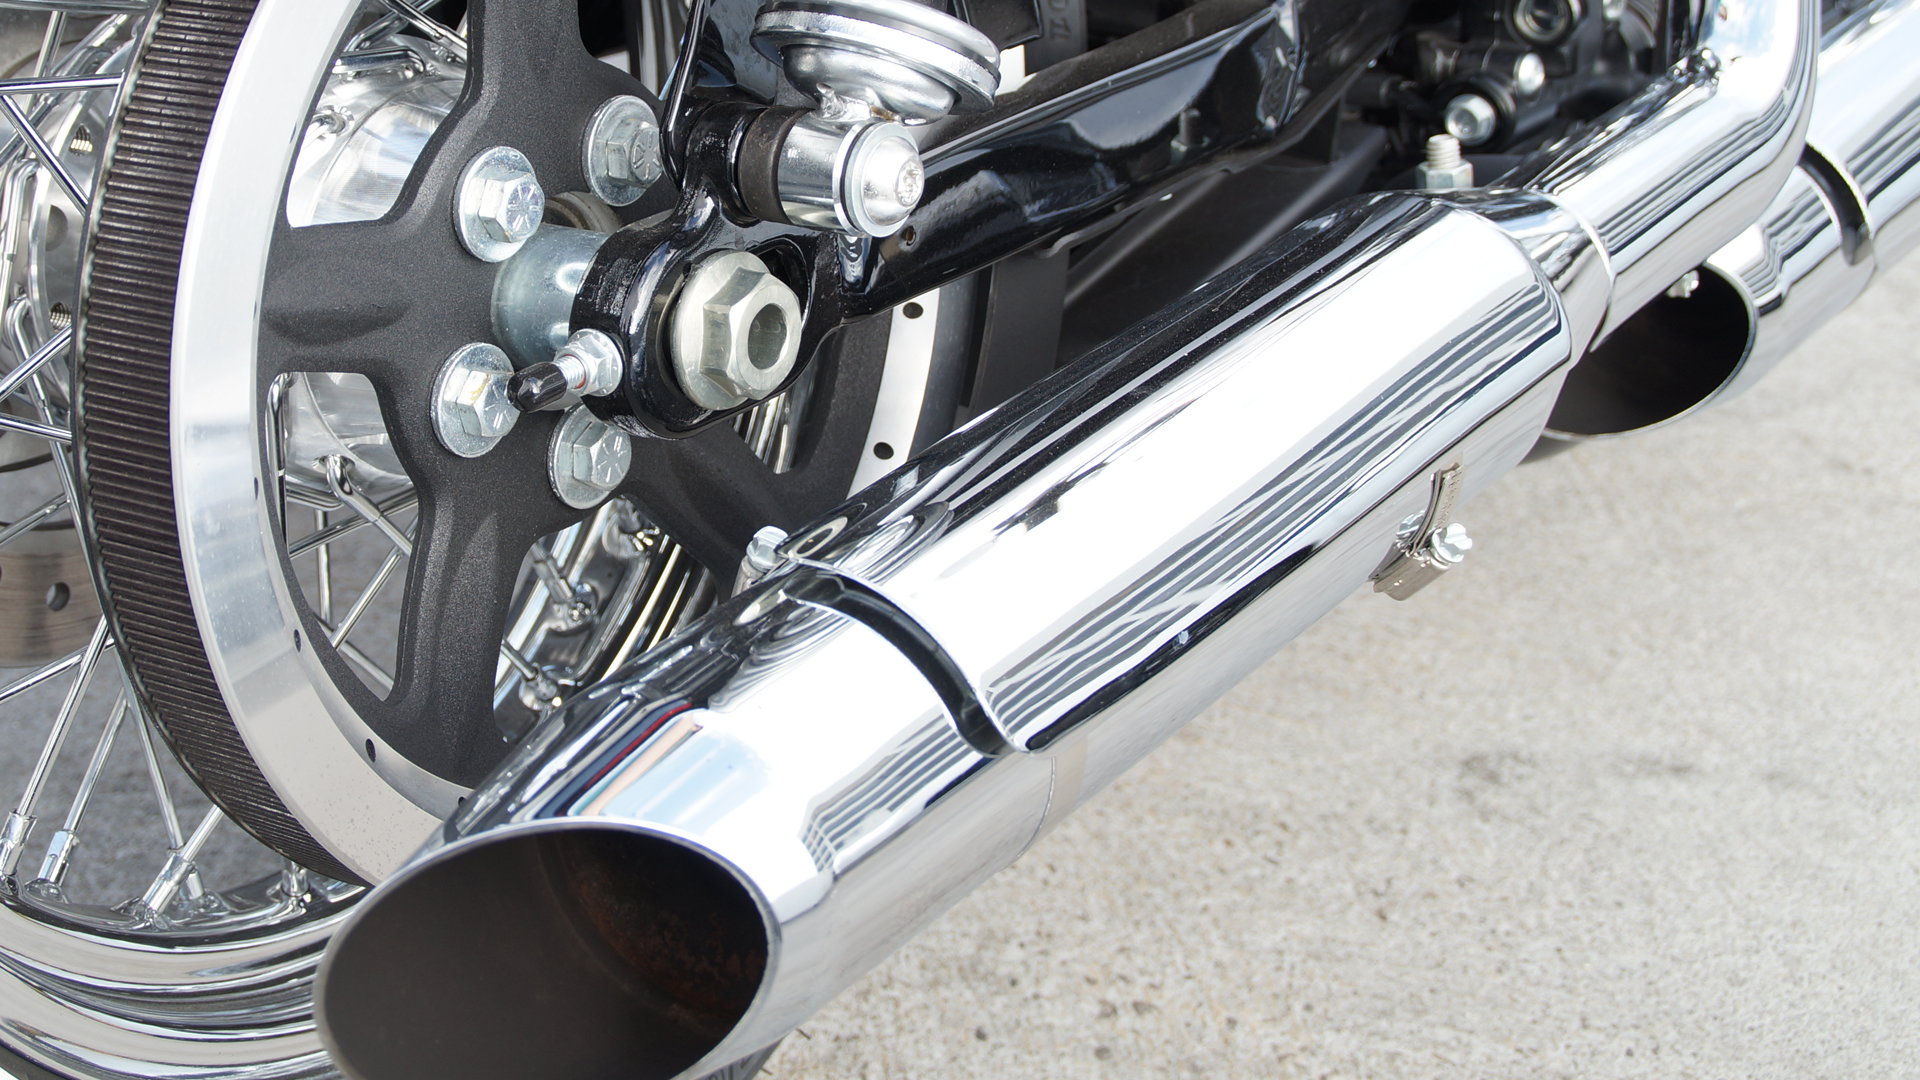 Harley Davidson Sportster: Exhaust Reviews and How to Replace Your